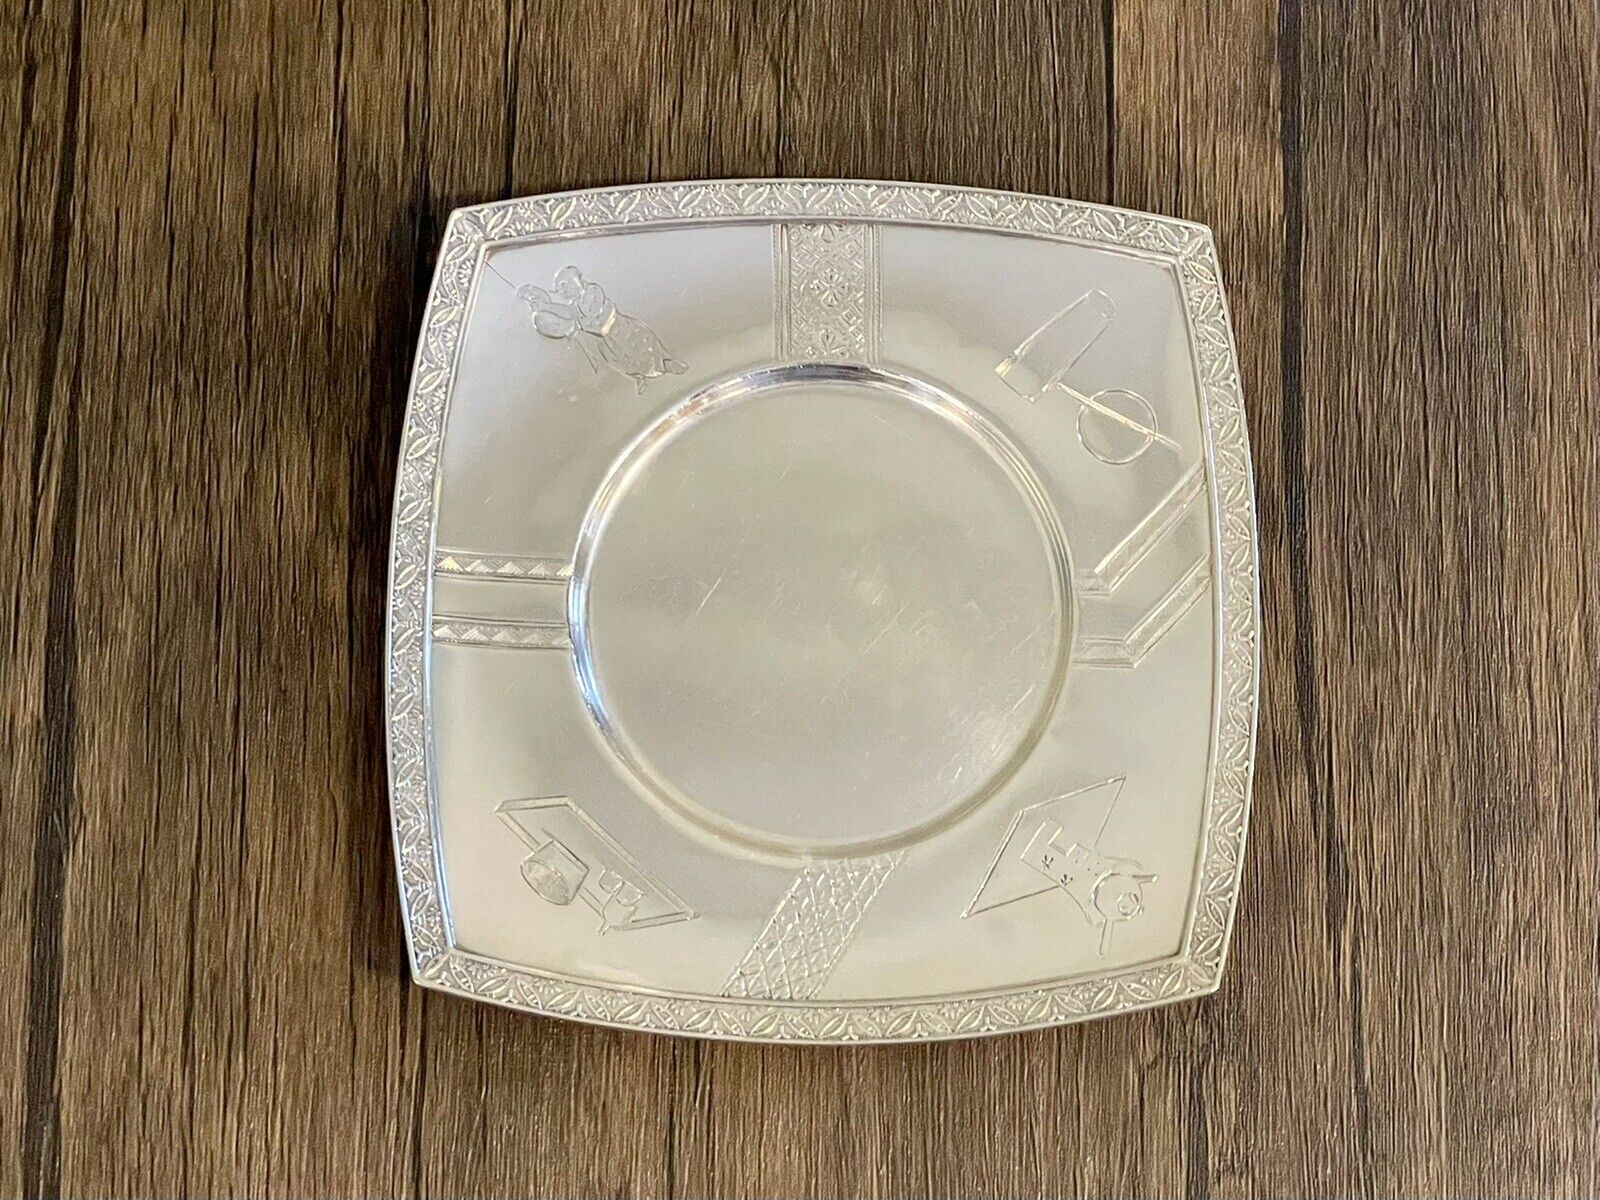 Antique Valuations: Aesthetic Movement Silver Tiffany & Co. Wine Coaster in Oriental Motif, 1860-70?